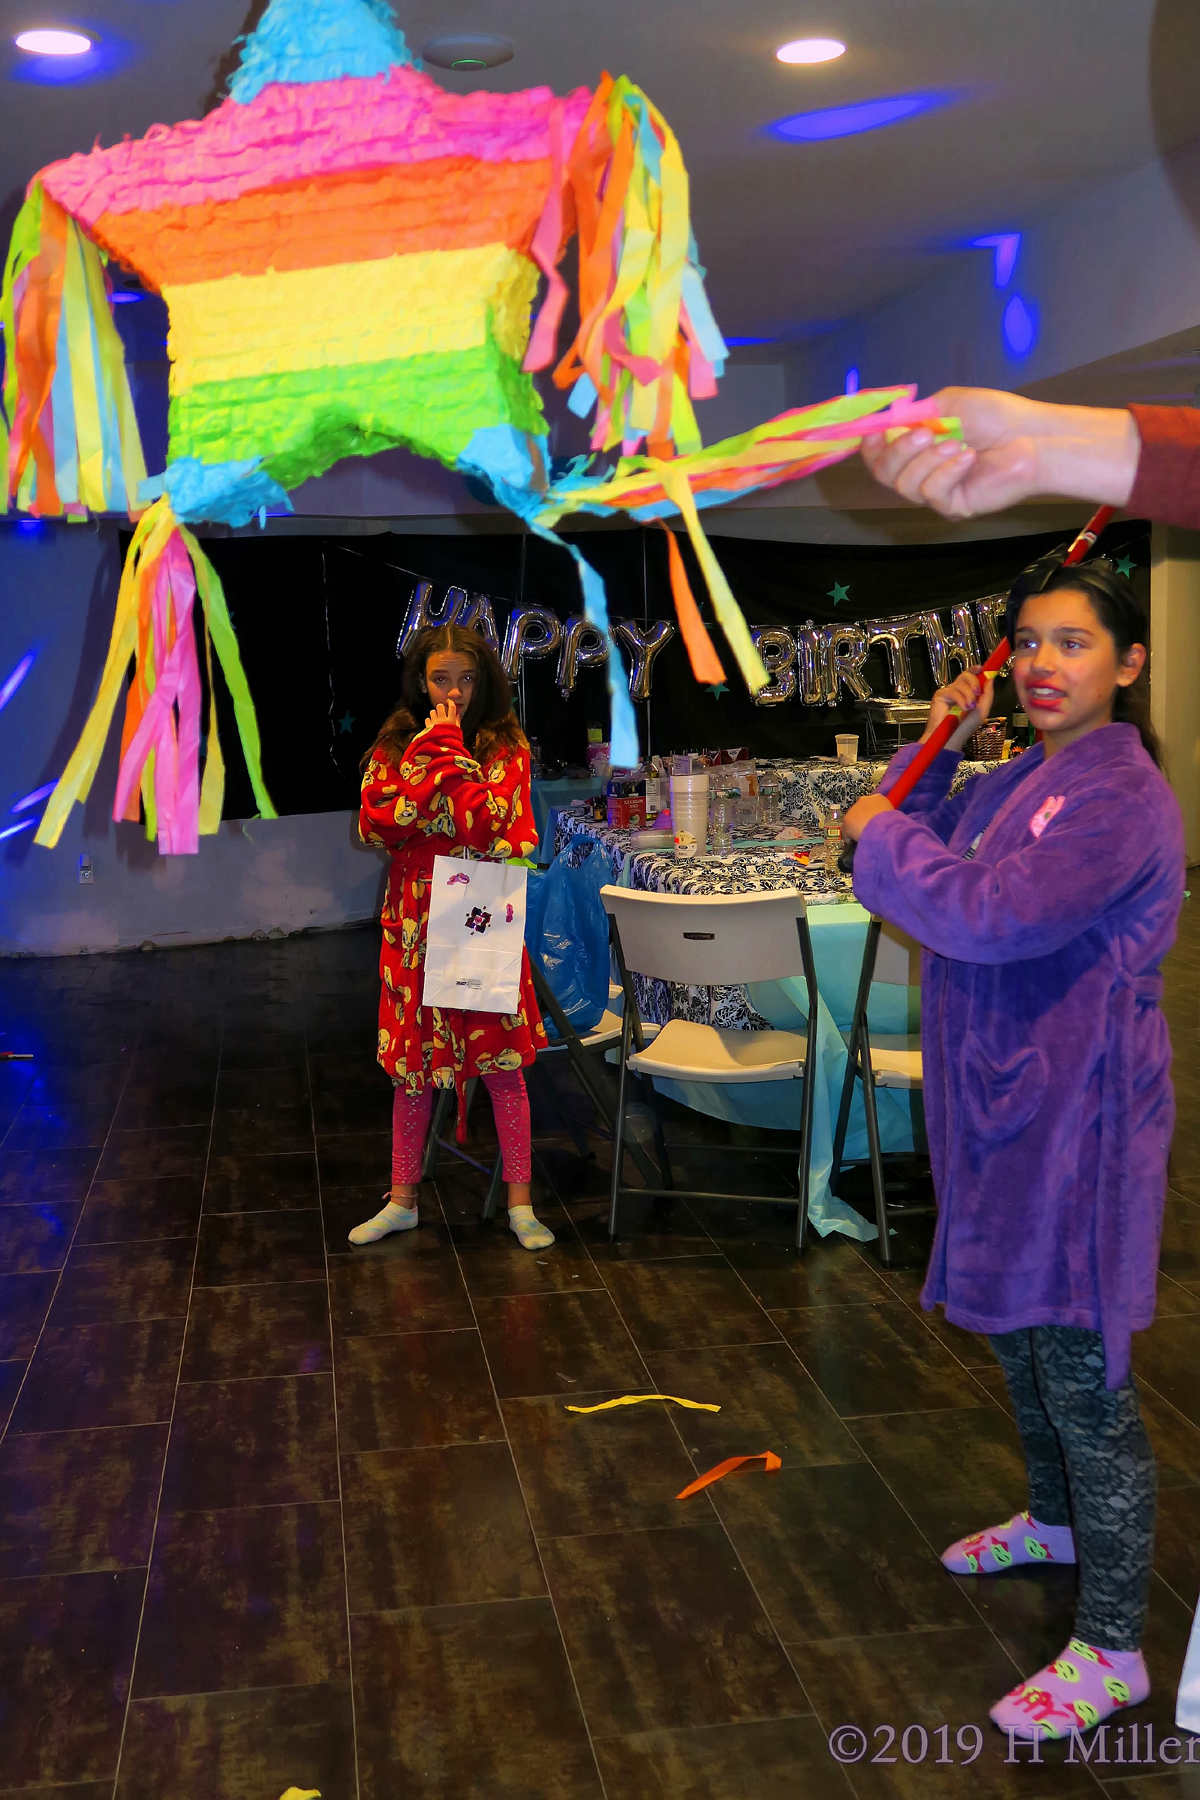 Picturing Candy Rain! Pinata Fun At The Spa Birthday Party! 